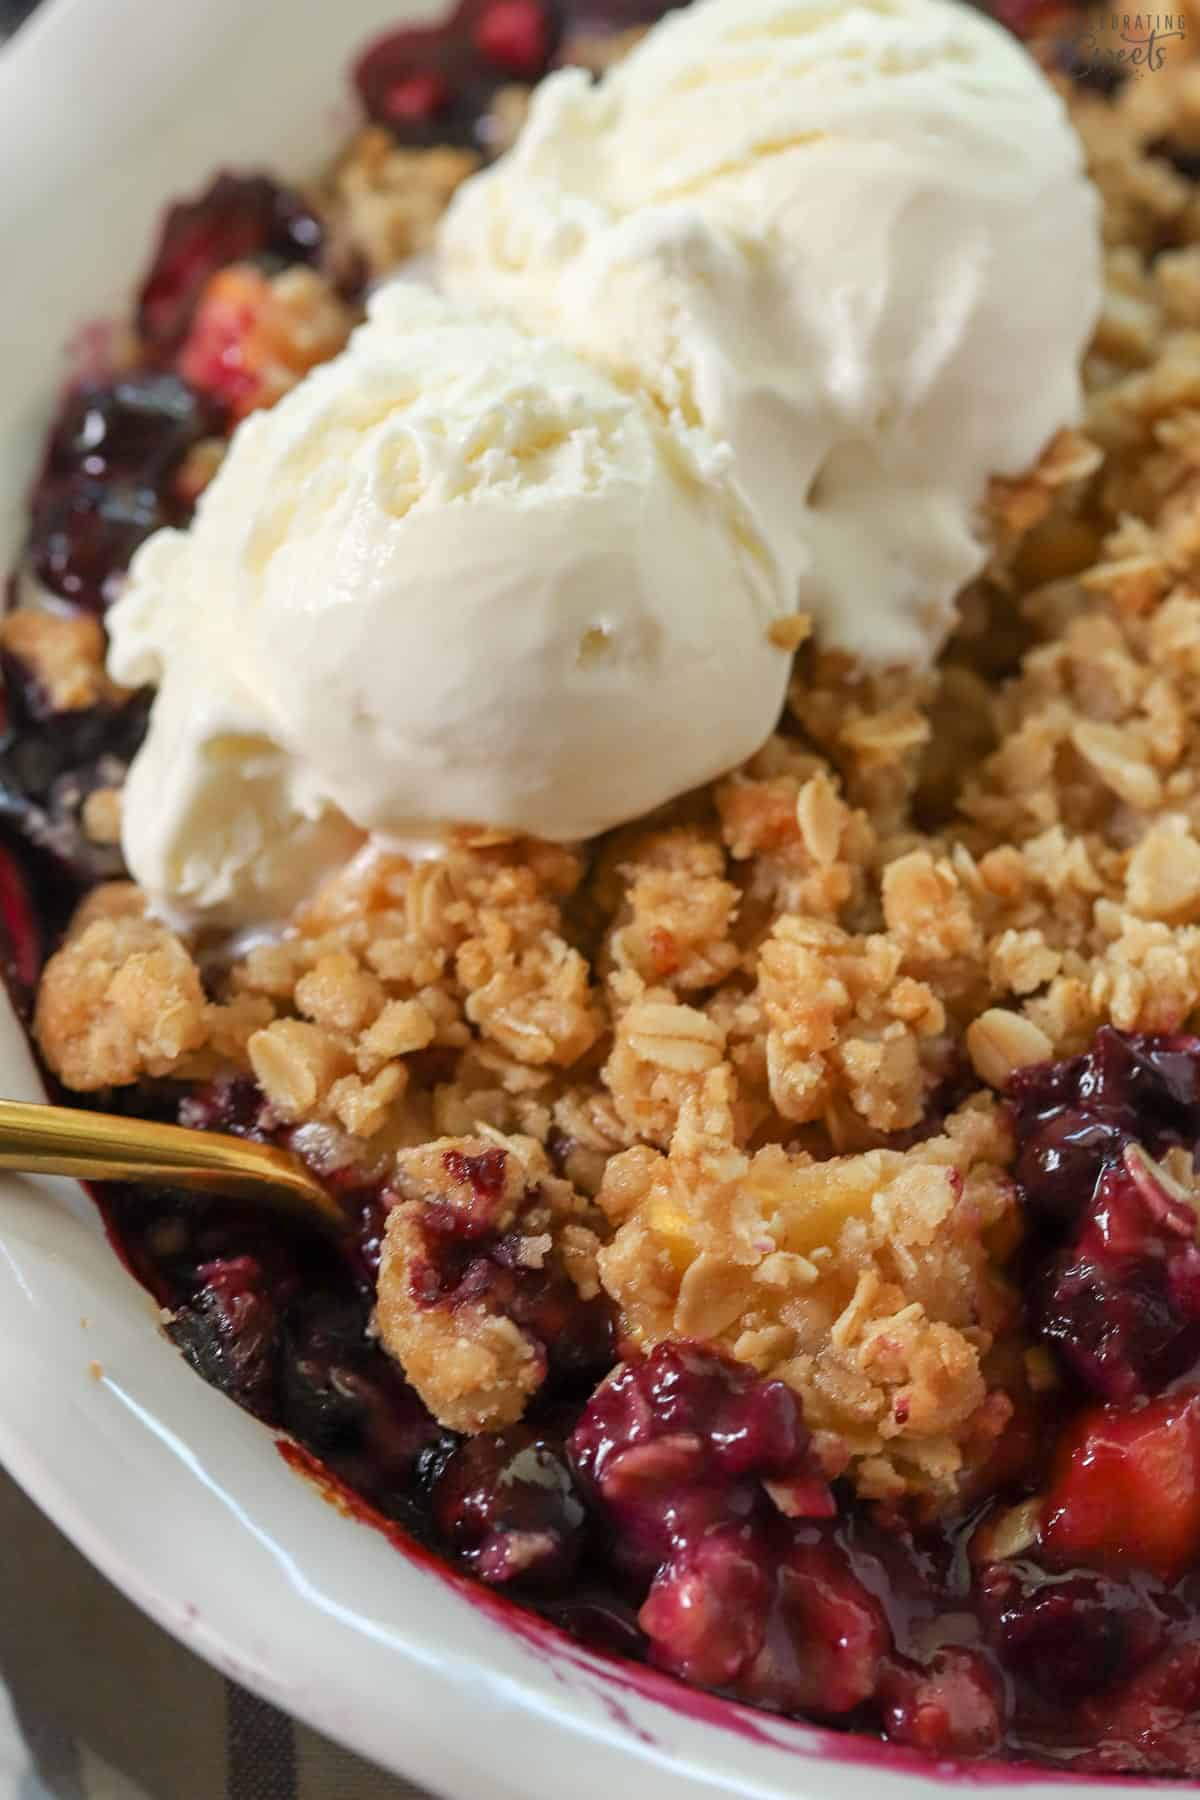 Blueberry peach crisp in white baking dish topped with ice cream.